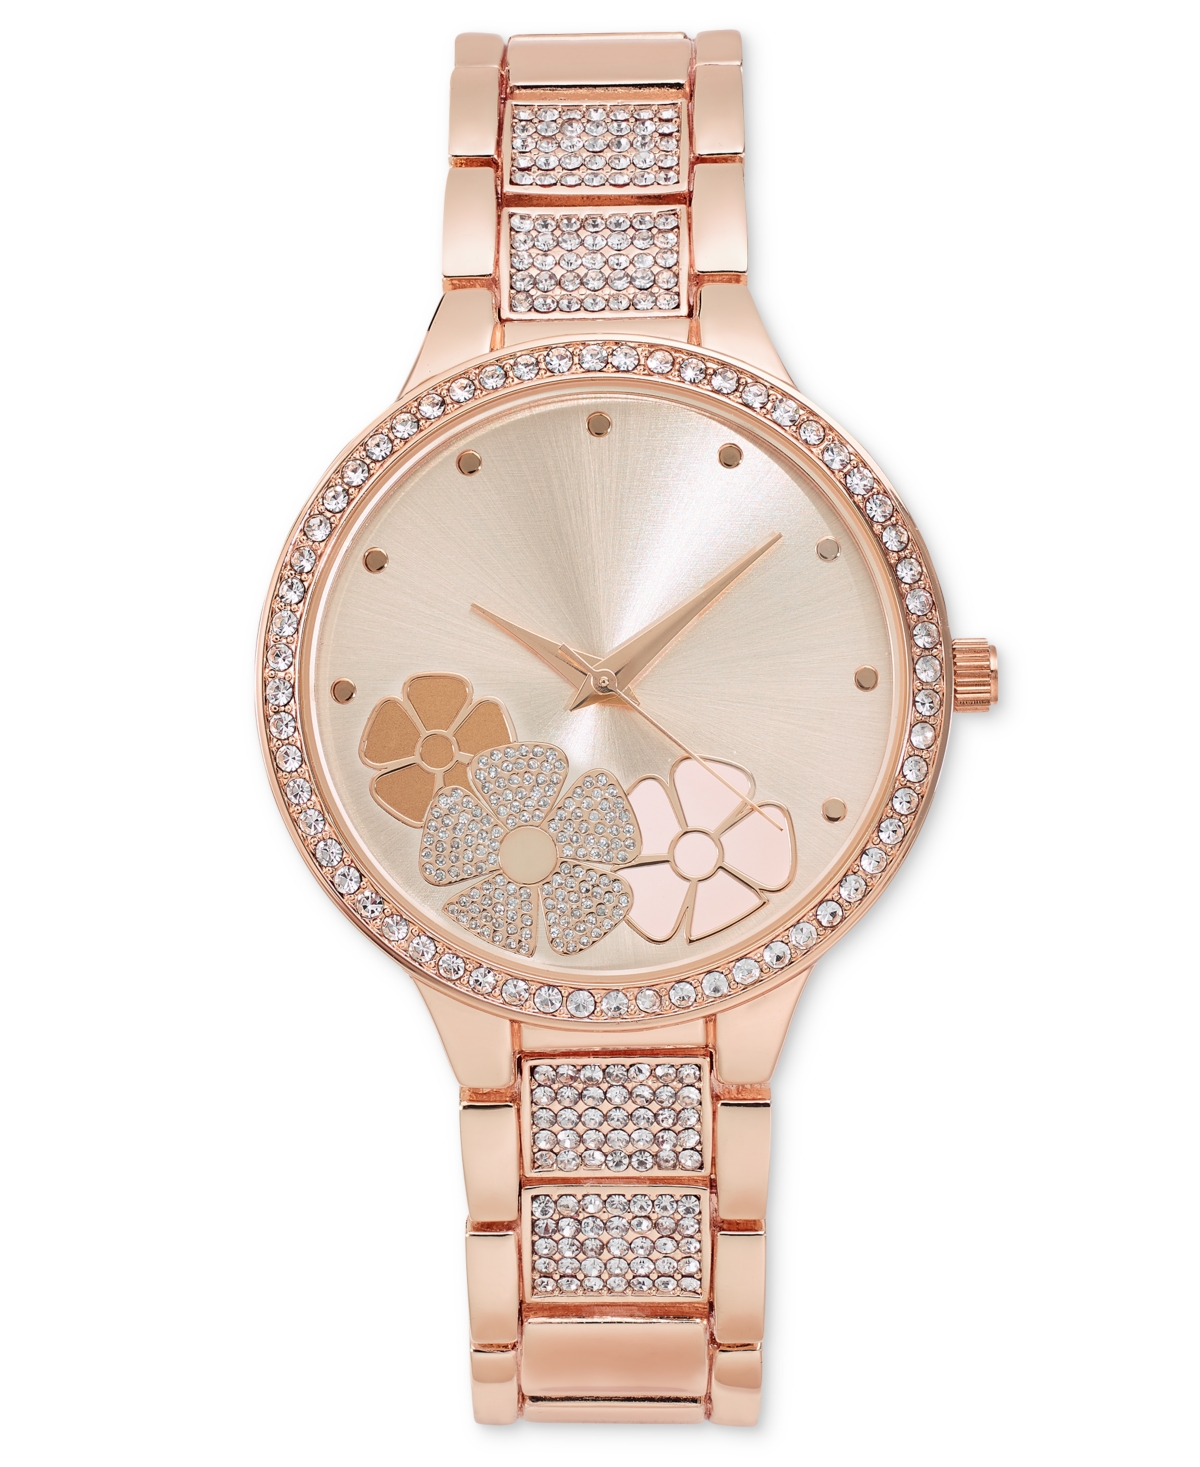 Women's Rose Gold-Tone Bracelet Watch 37mm, Created for Macy's - Rose Gold